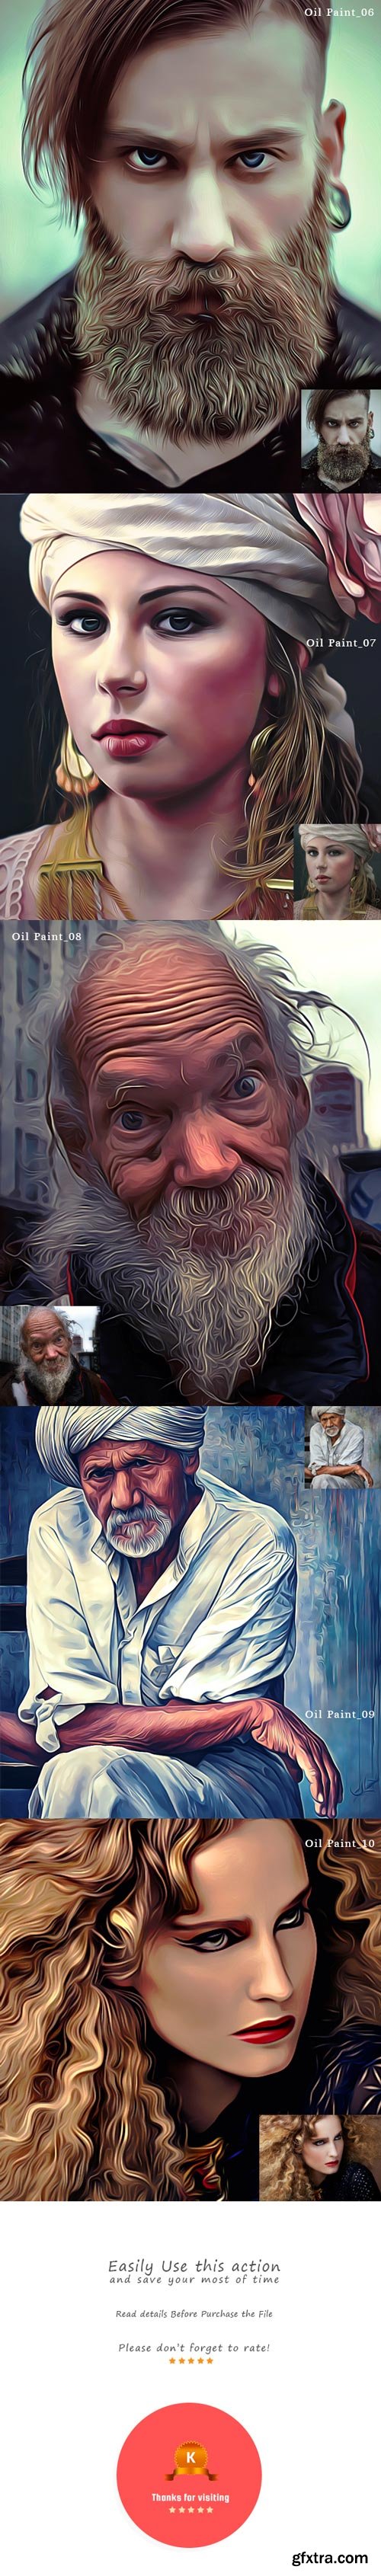 GraphicRiver - Popular Oil Painting Action - 19377761